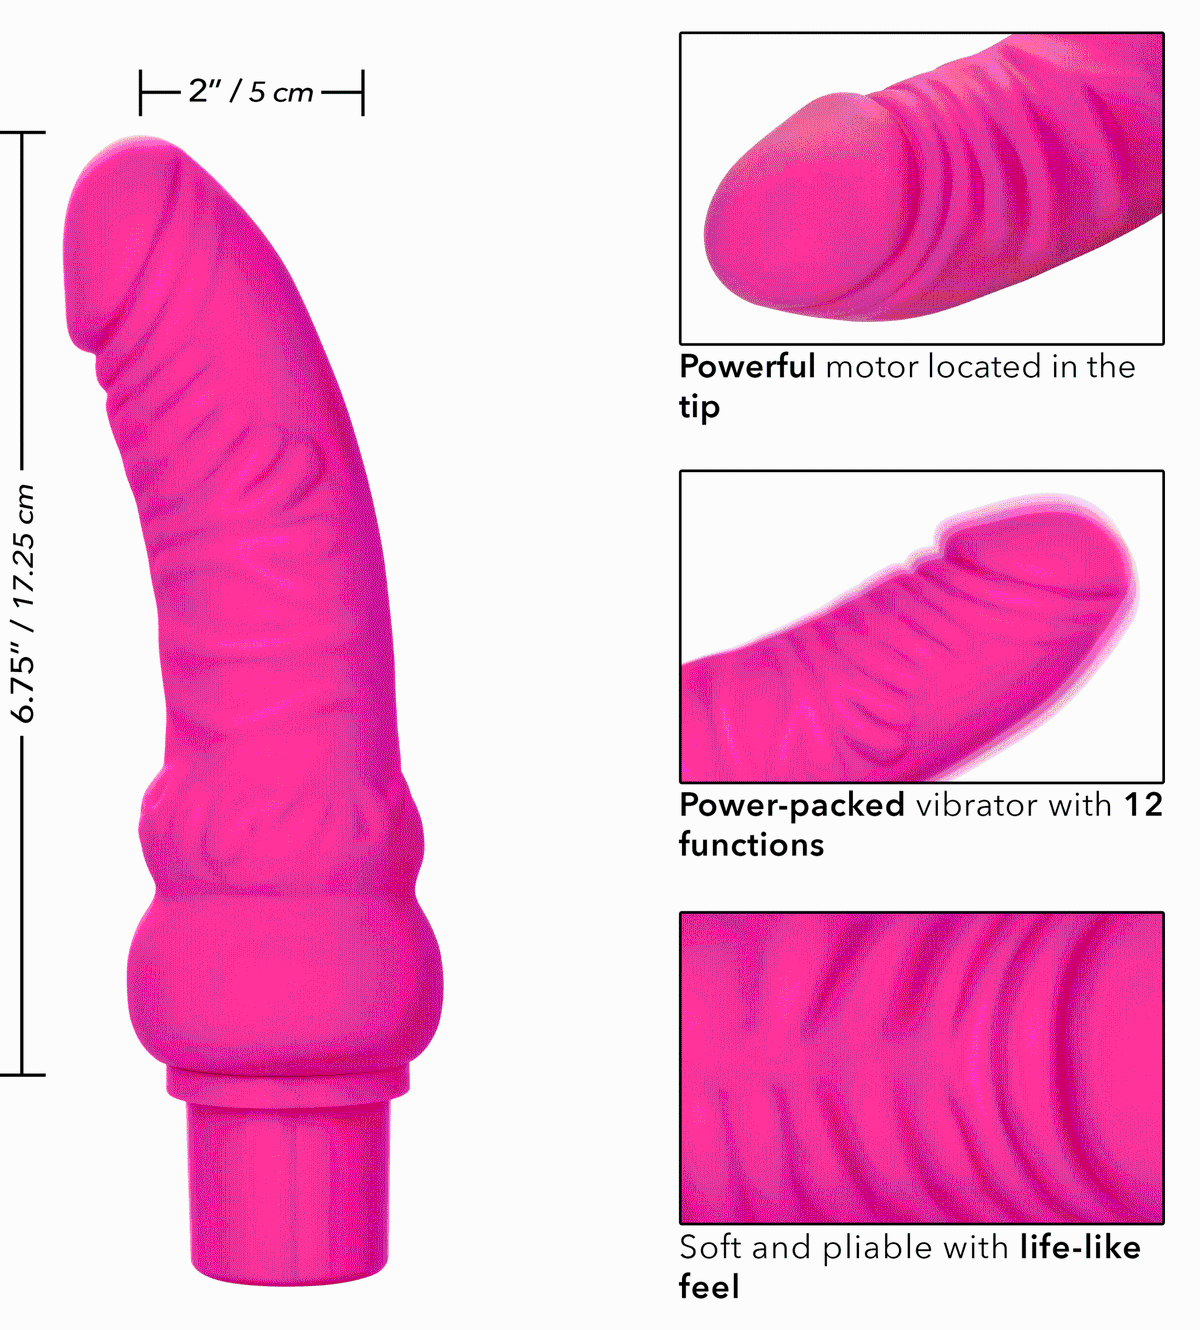 rechargeable power stud curvy pink